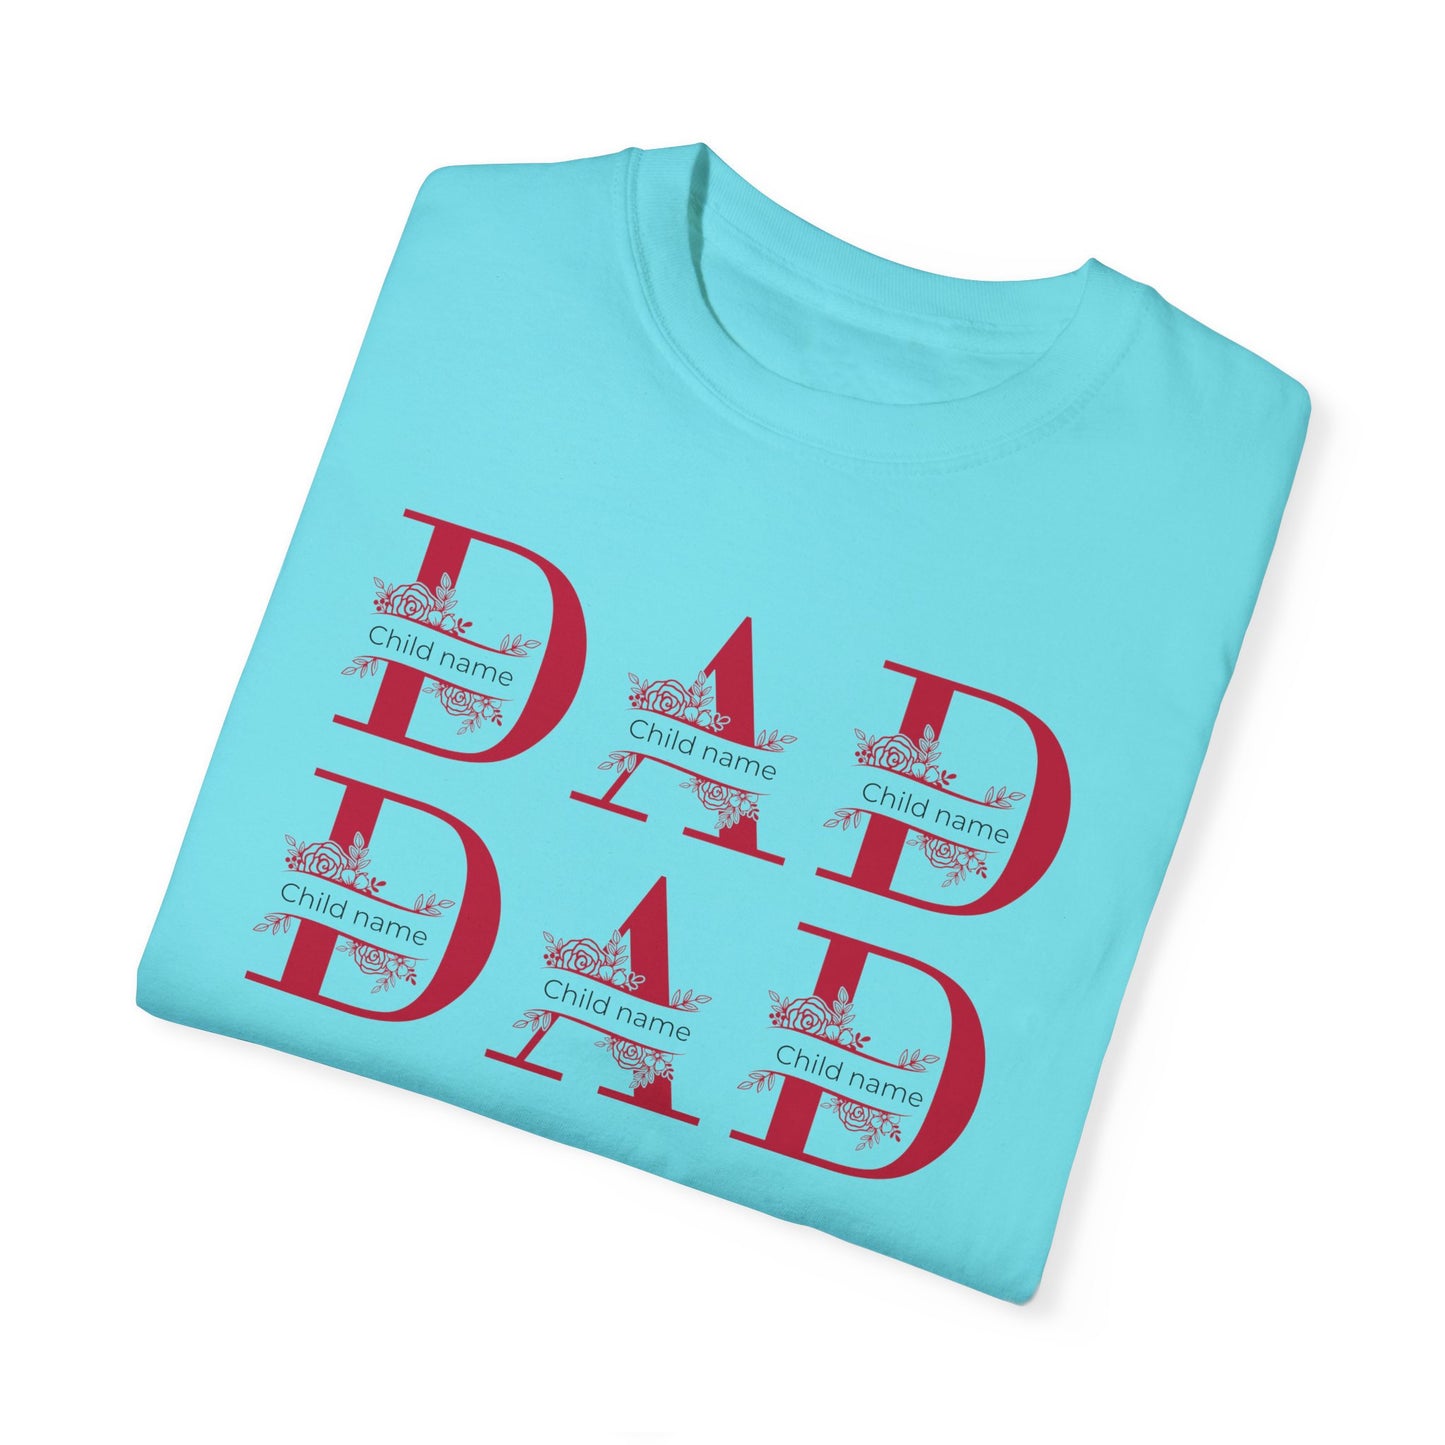 Personalize dad Unisex Garment-Dyed T-shirt